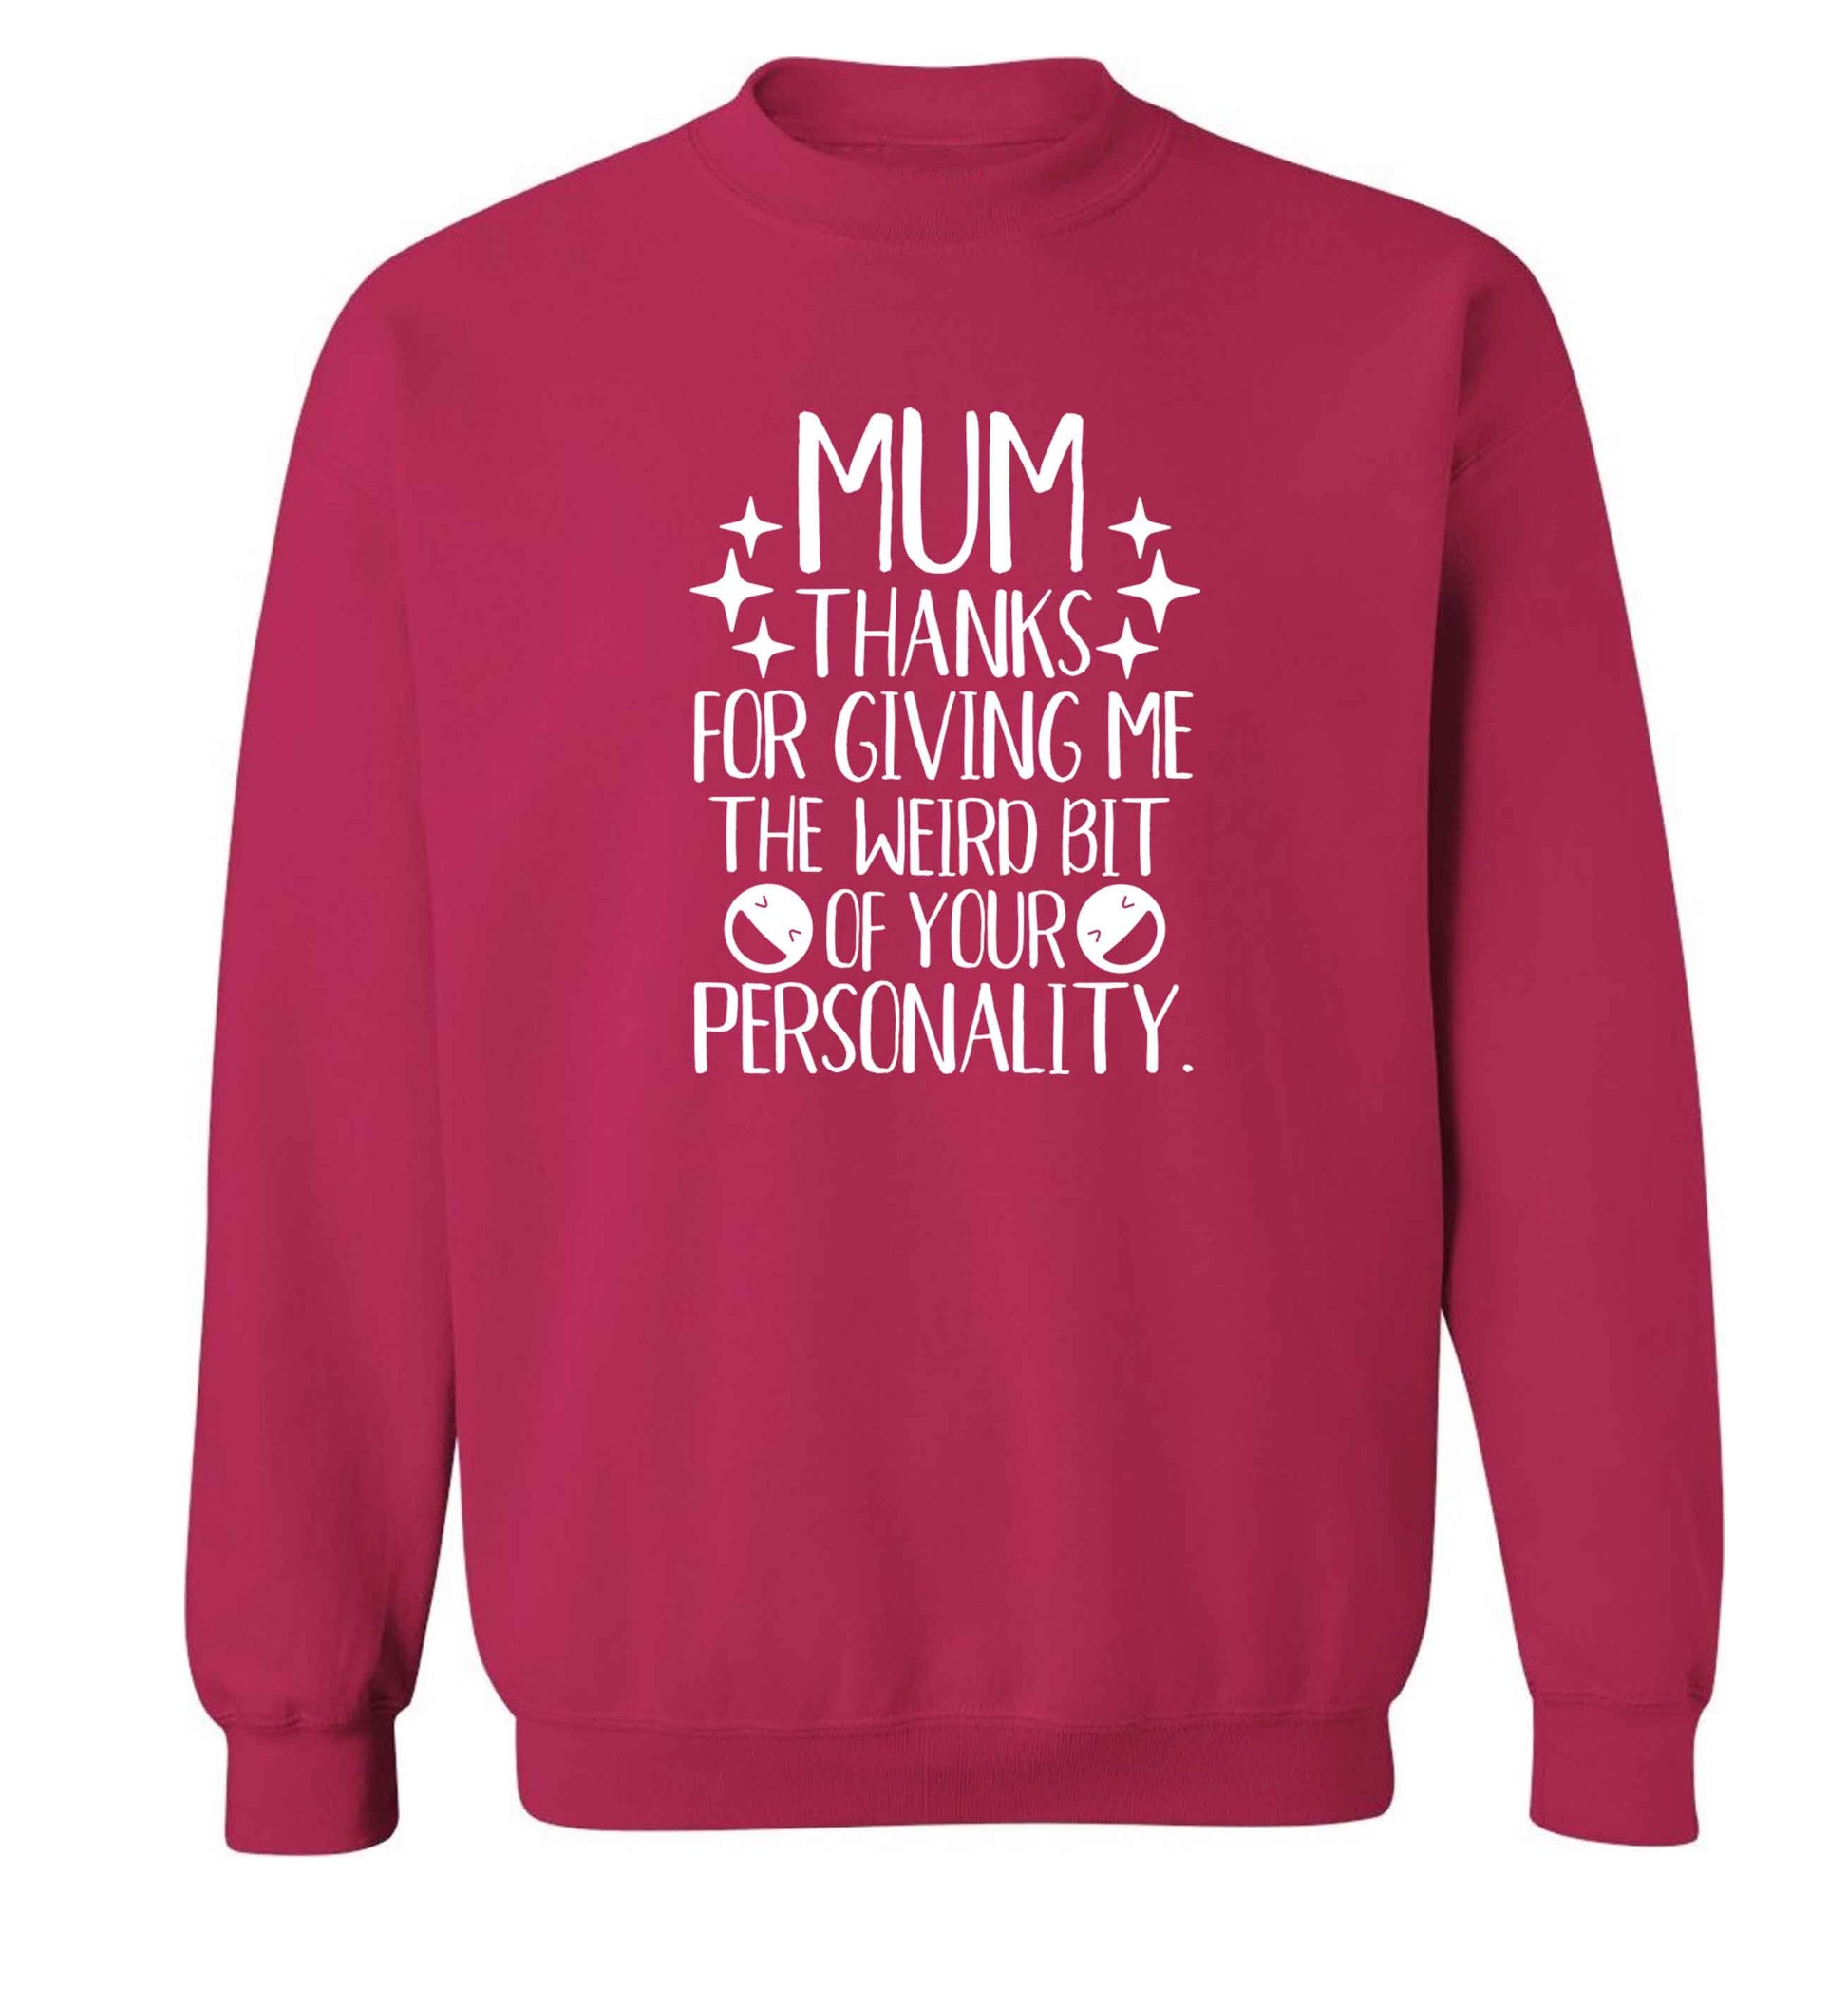 Mum, I love you more than halloumi and if you know me at all you know how deep that is adult's unisex pink sweater 2XL